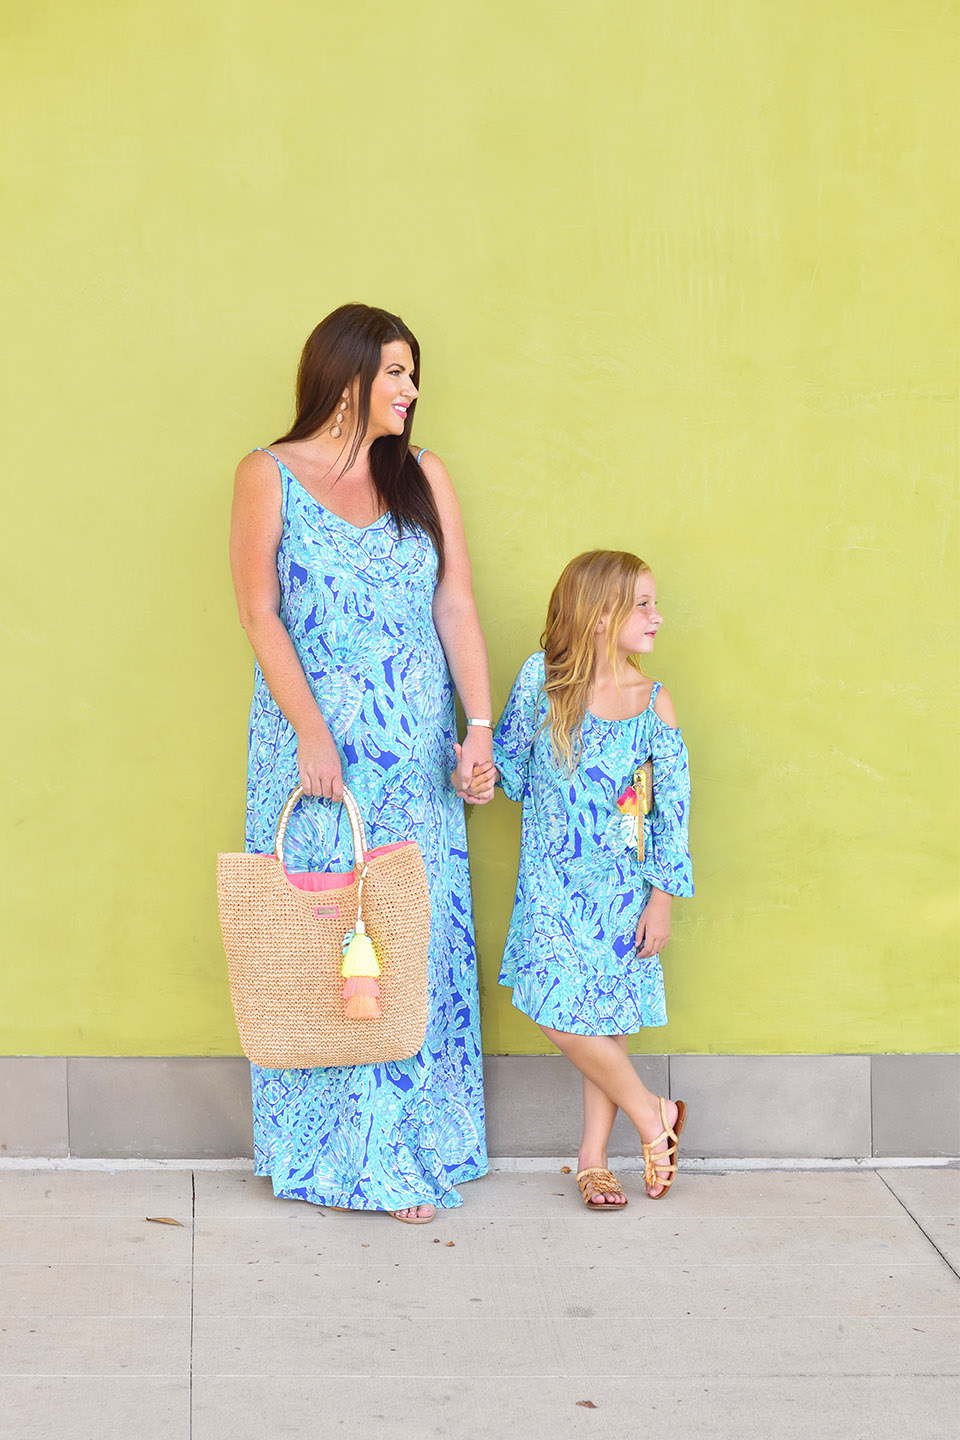 Jami Ray Grand Boulevard Lilly Pulitzer Allair Dress Mommy and Me